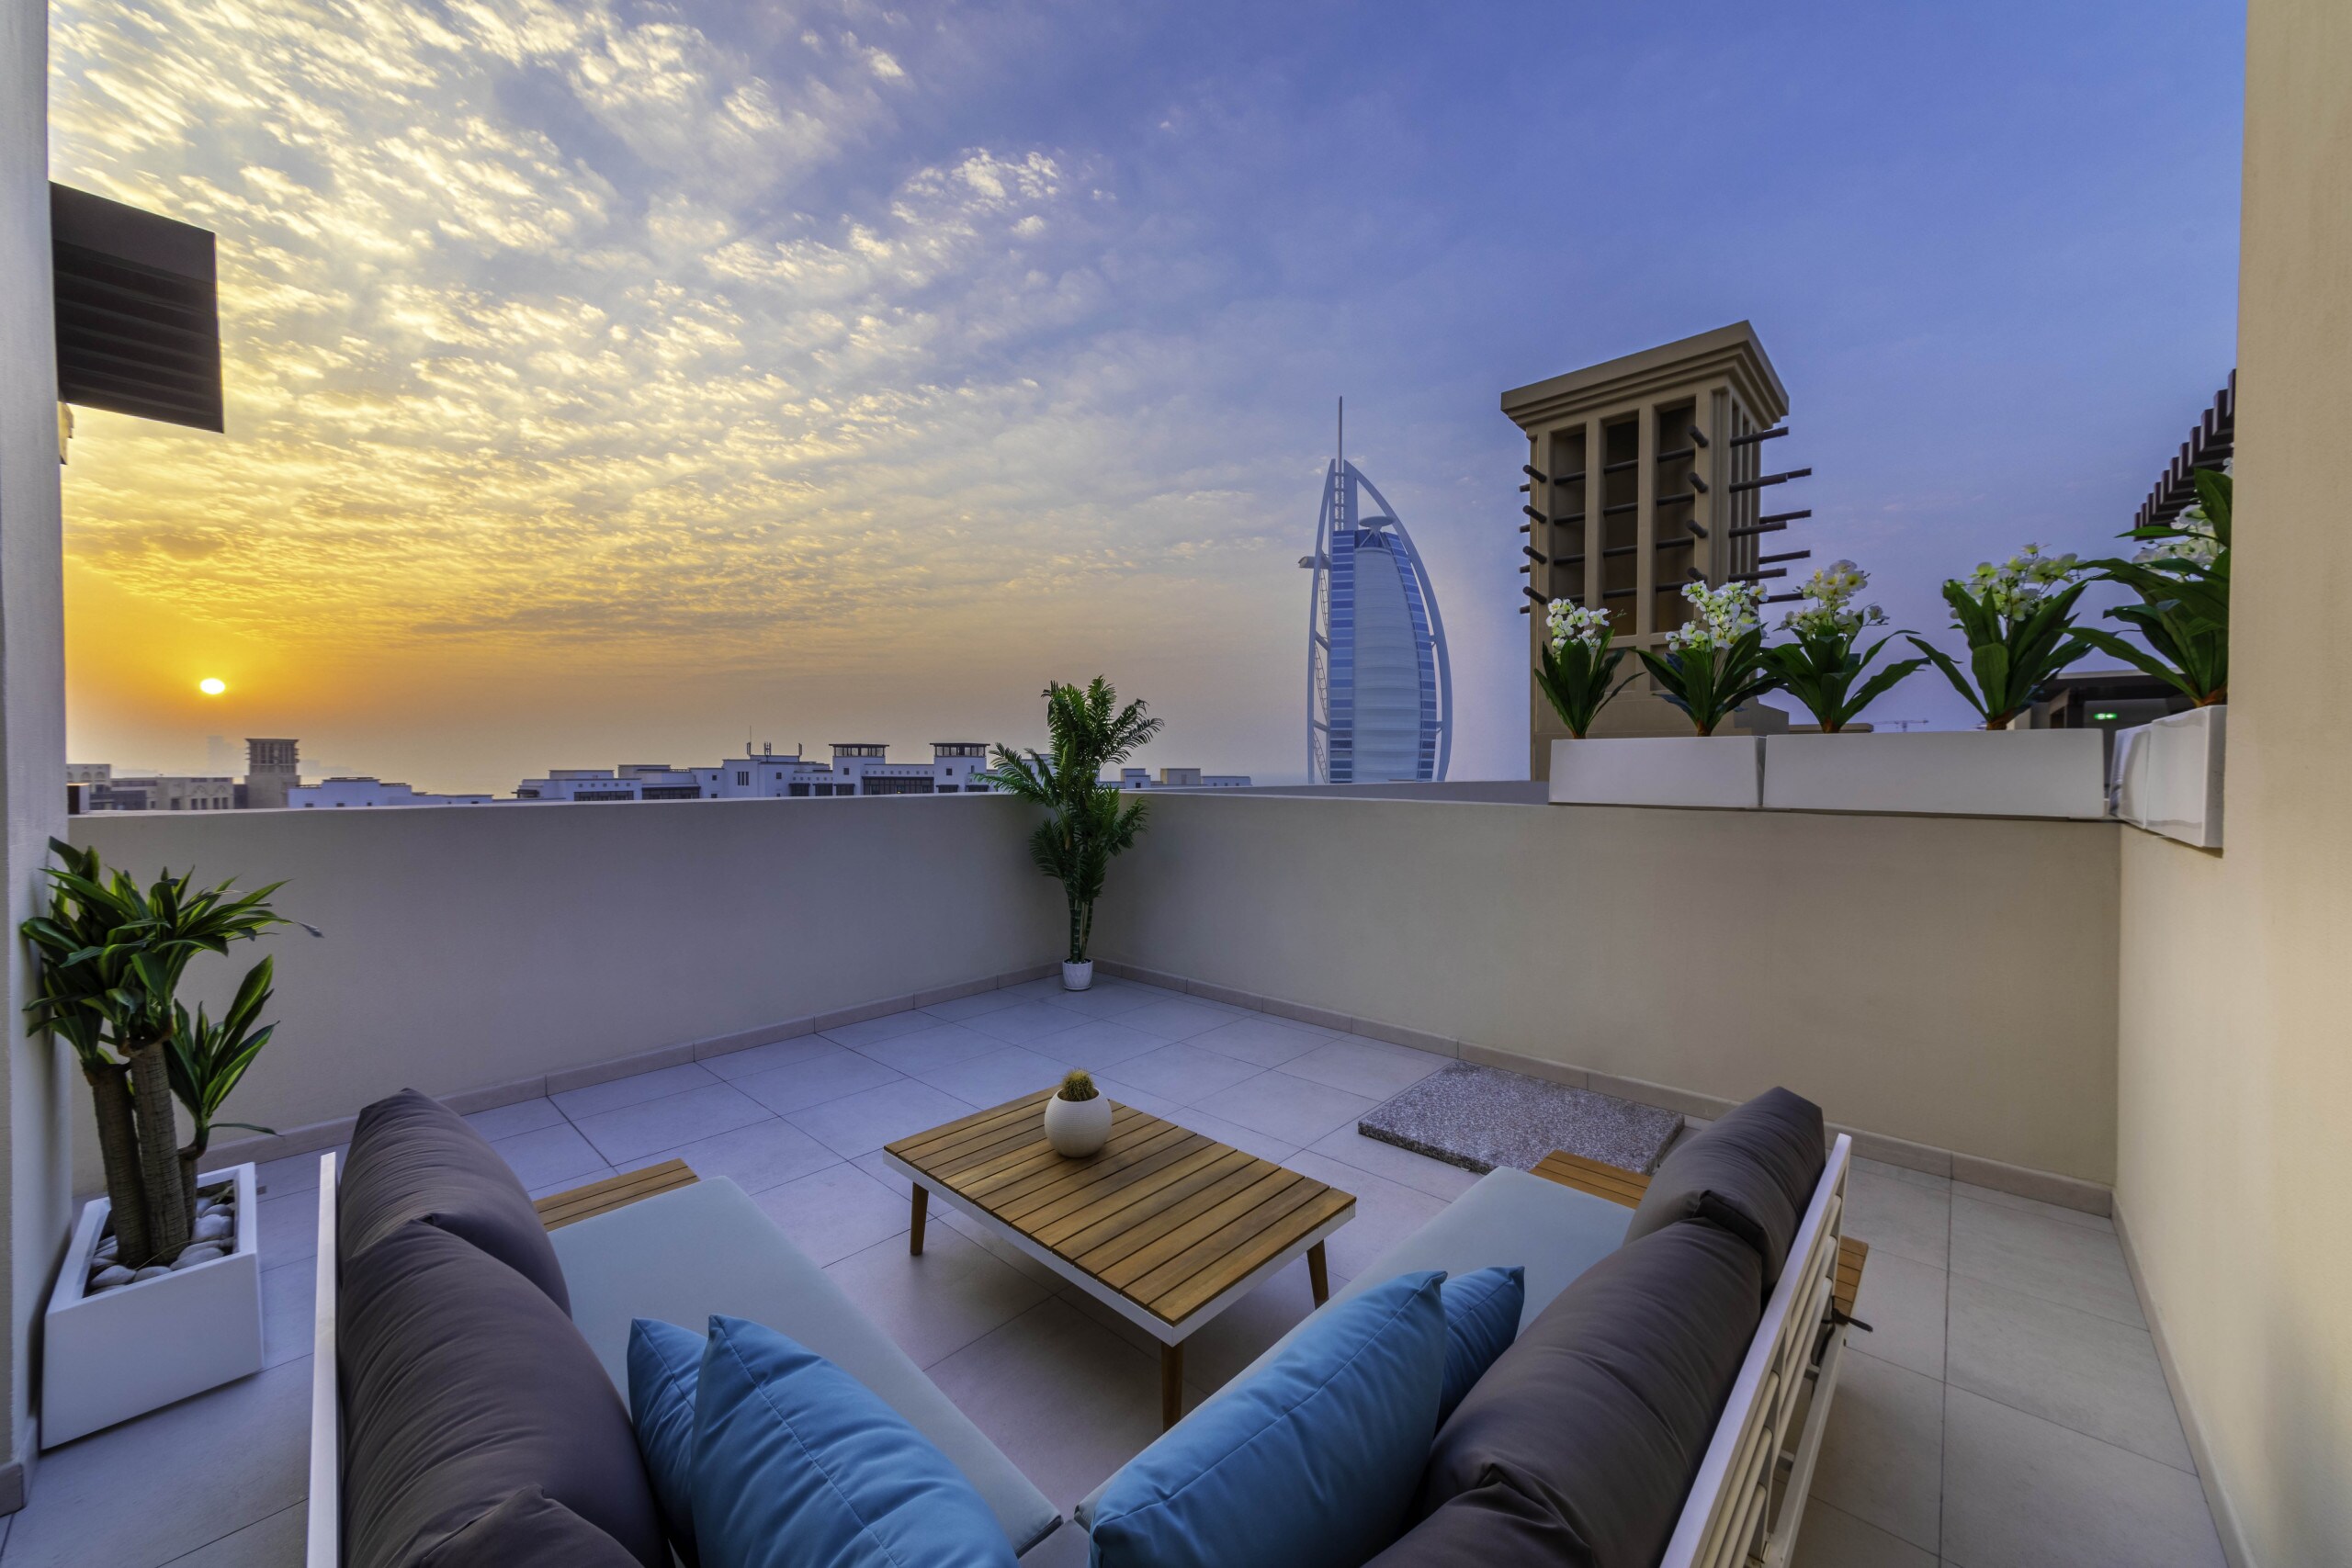 Property Image 1 -  Exclusive Seaview 3BR Roof Terrace Apt with Scenic Views of Burj alArab